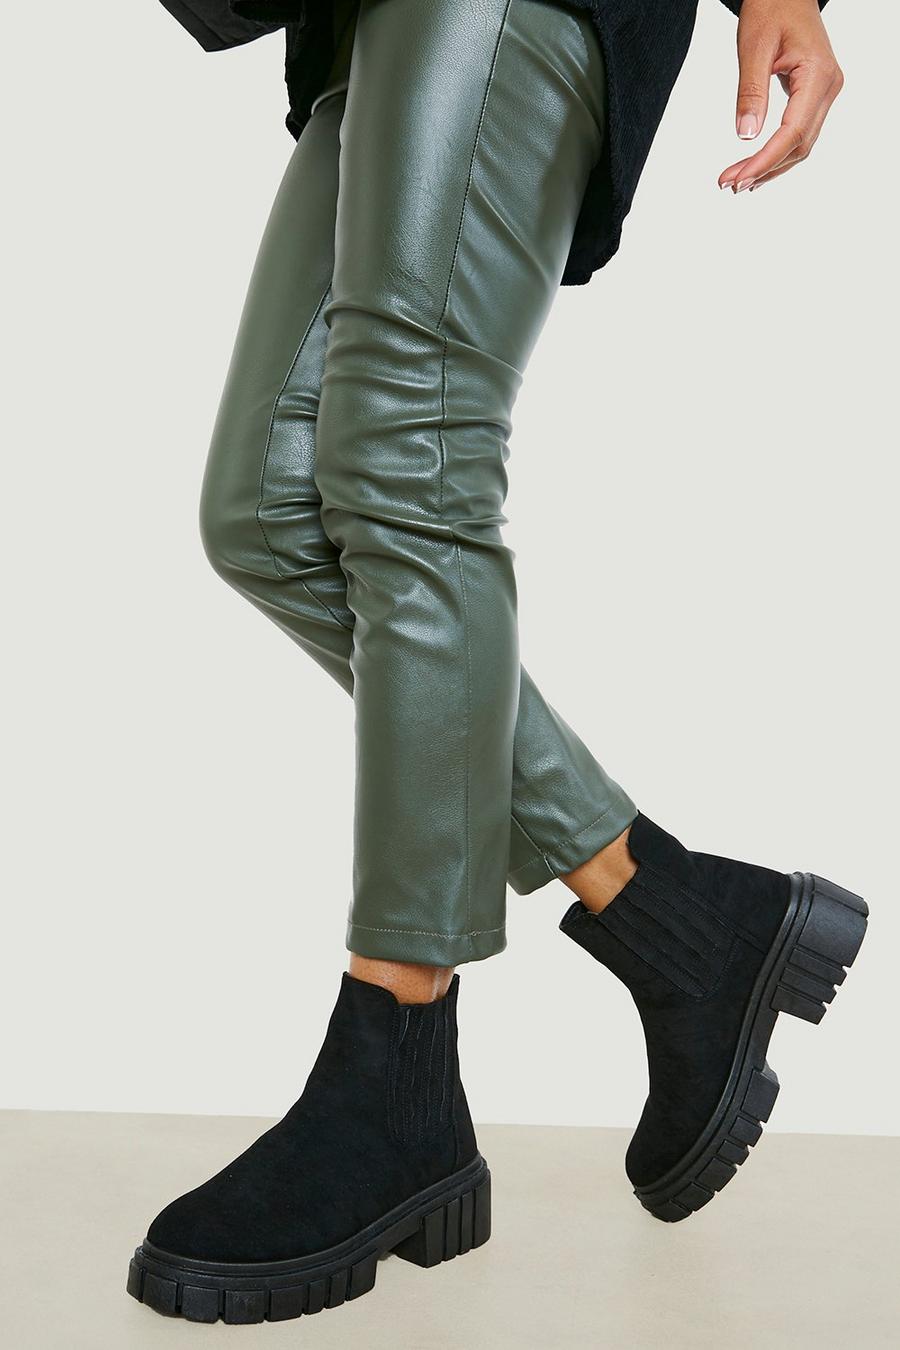 Black Covered Chelsea Detail Chunky Boots